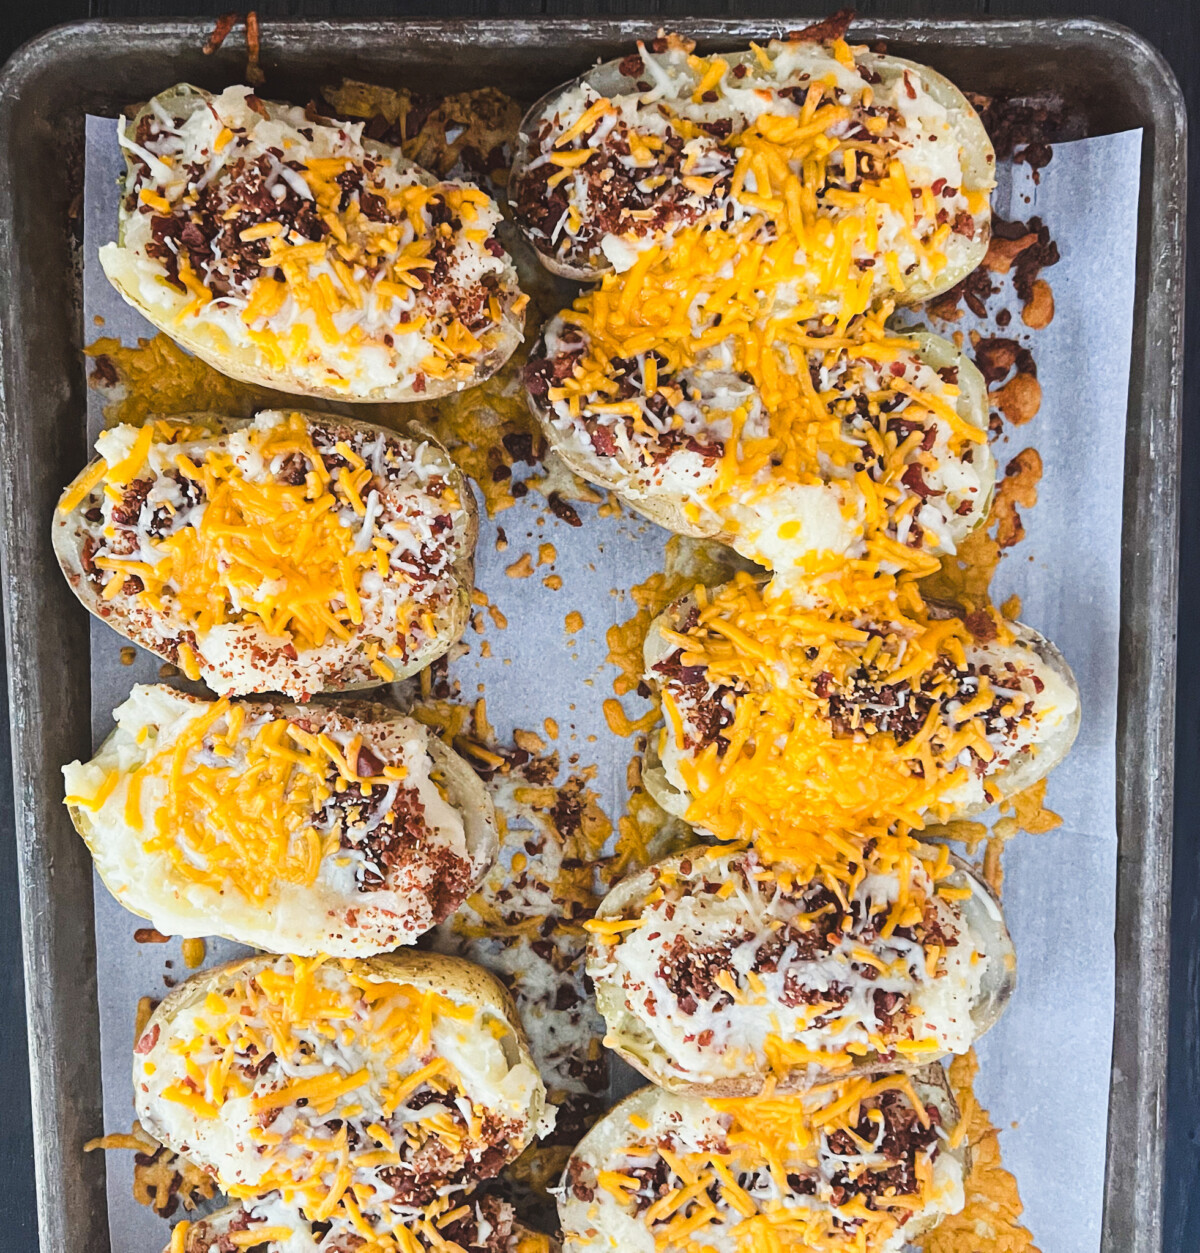 A twice baked potato with a cheesy, creamy filling and a crispy skin. The potato is halved and topped with cheese and bacon. 